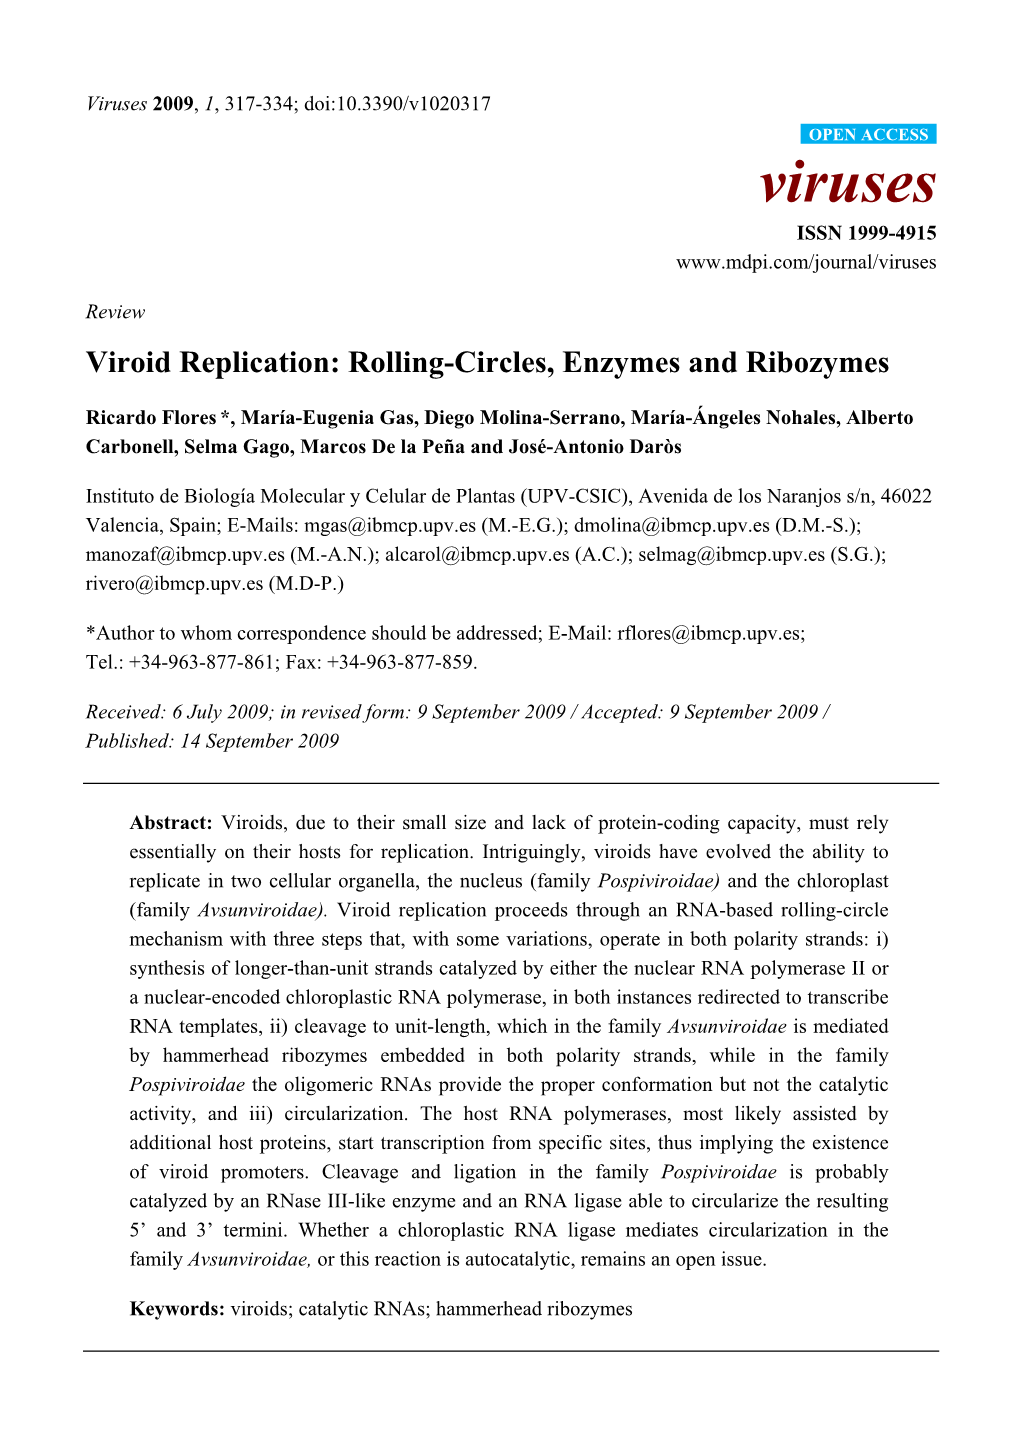 Viroid Replication: Rolling-Circles, Enzymes and Ribozymes